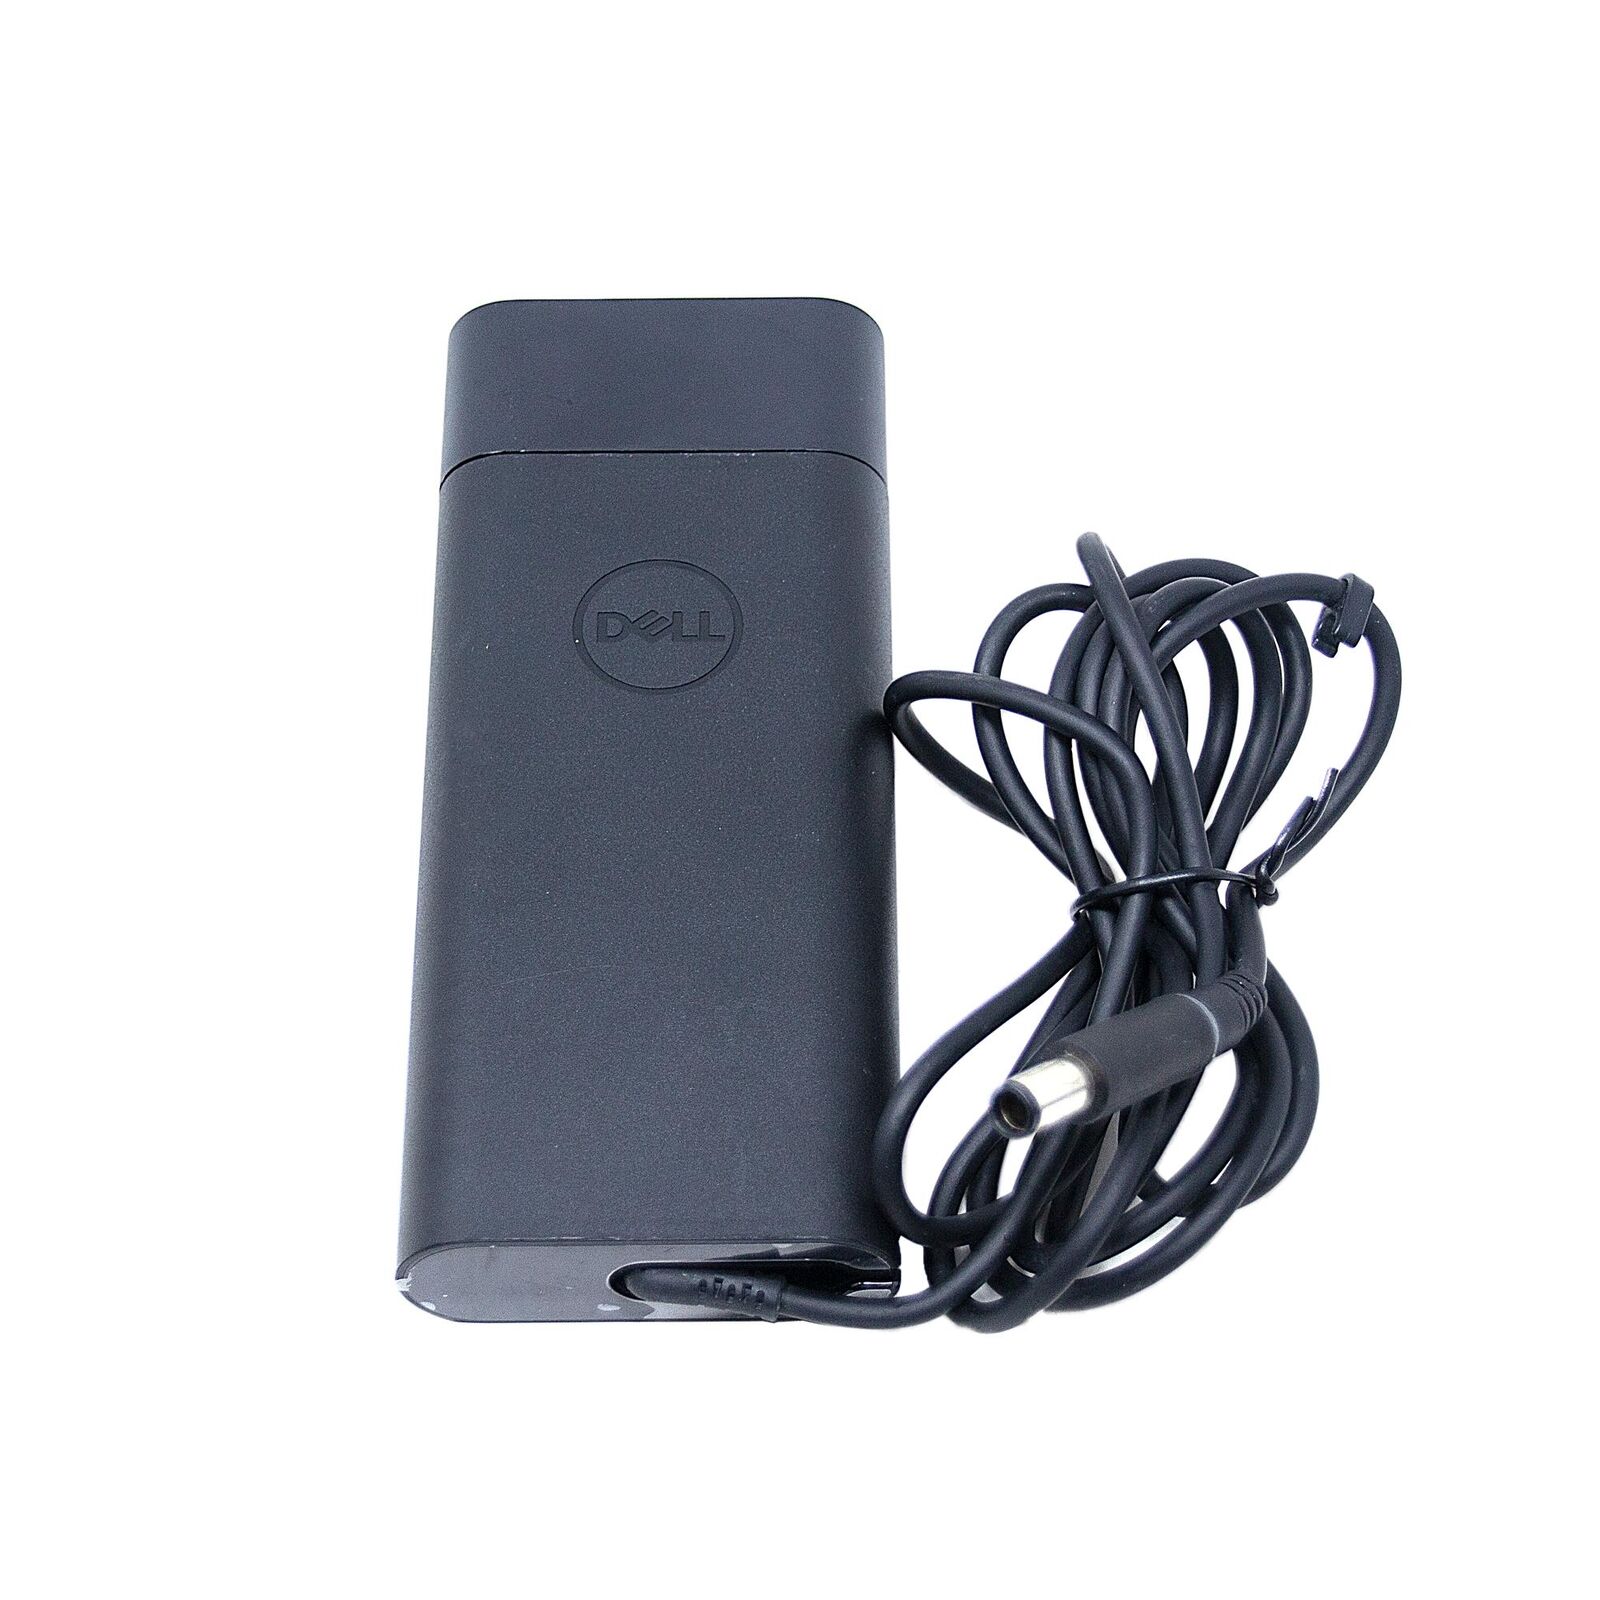 DELL 90YP3 19.5V 4.62A 90W Genuine Original AC Power Adapter Charger